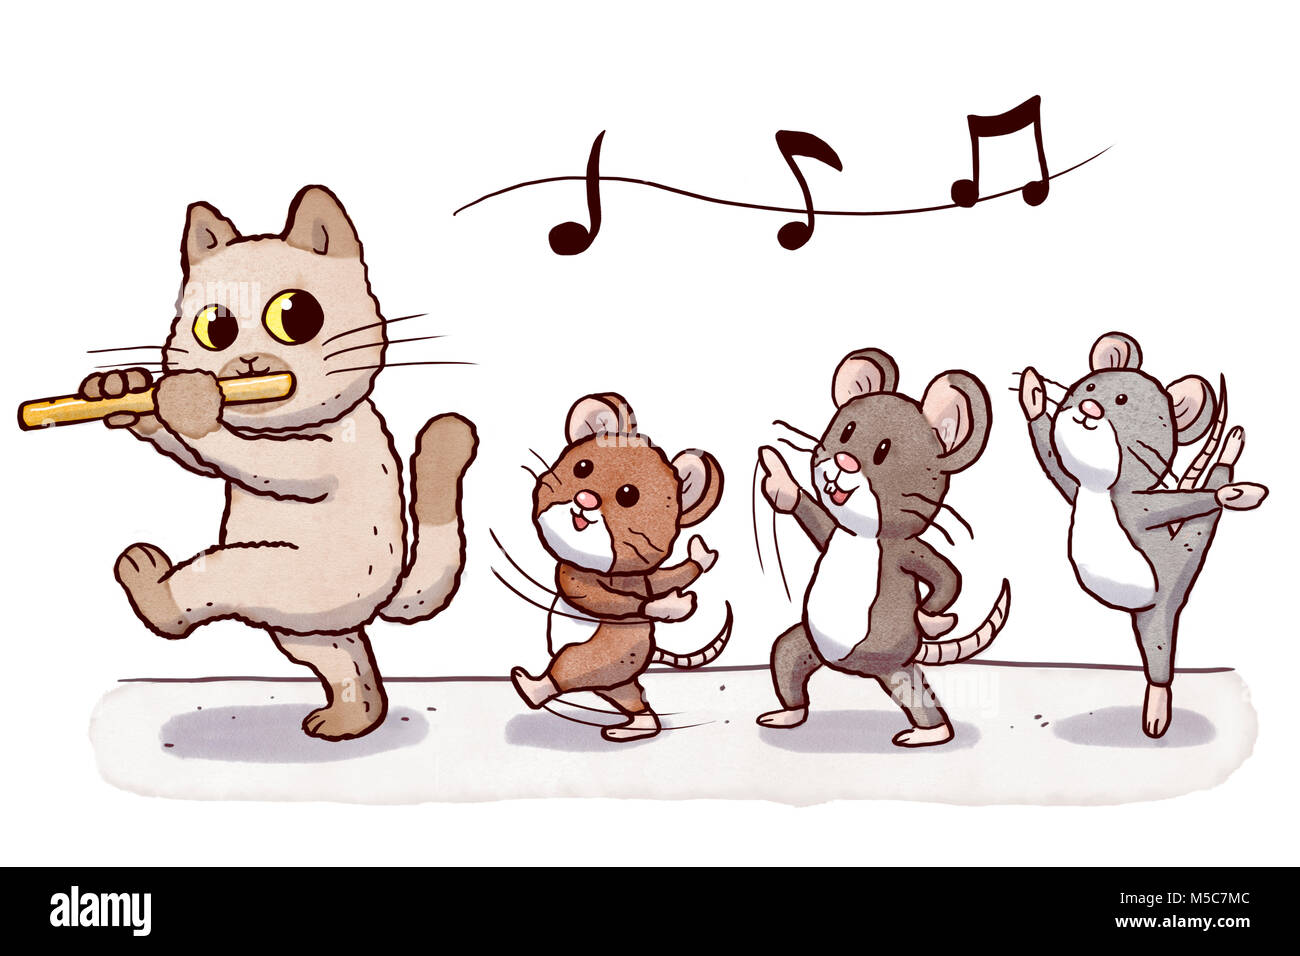 Cat playing flute and followed by three cute rats dancing Stock Photo